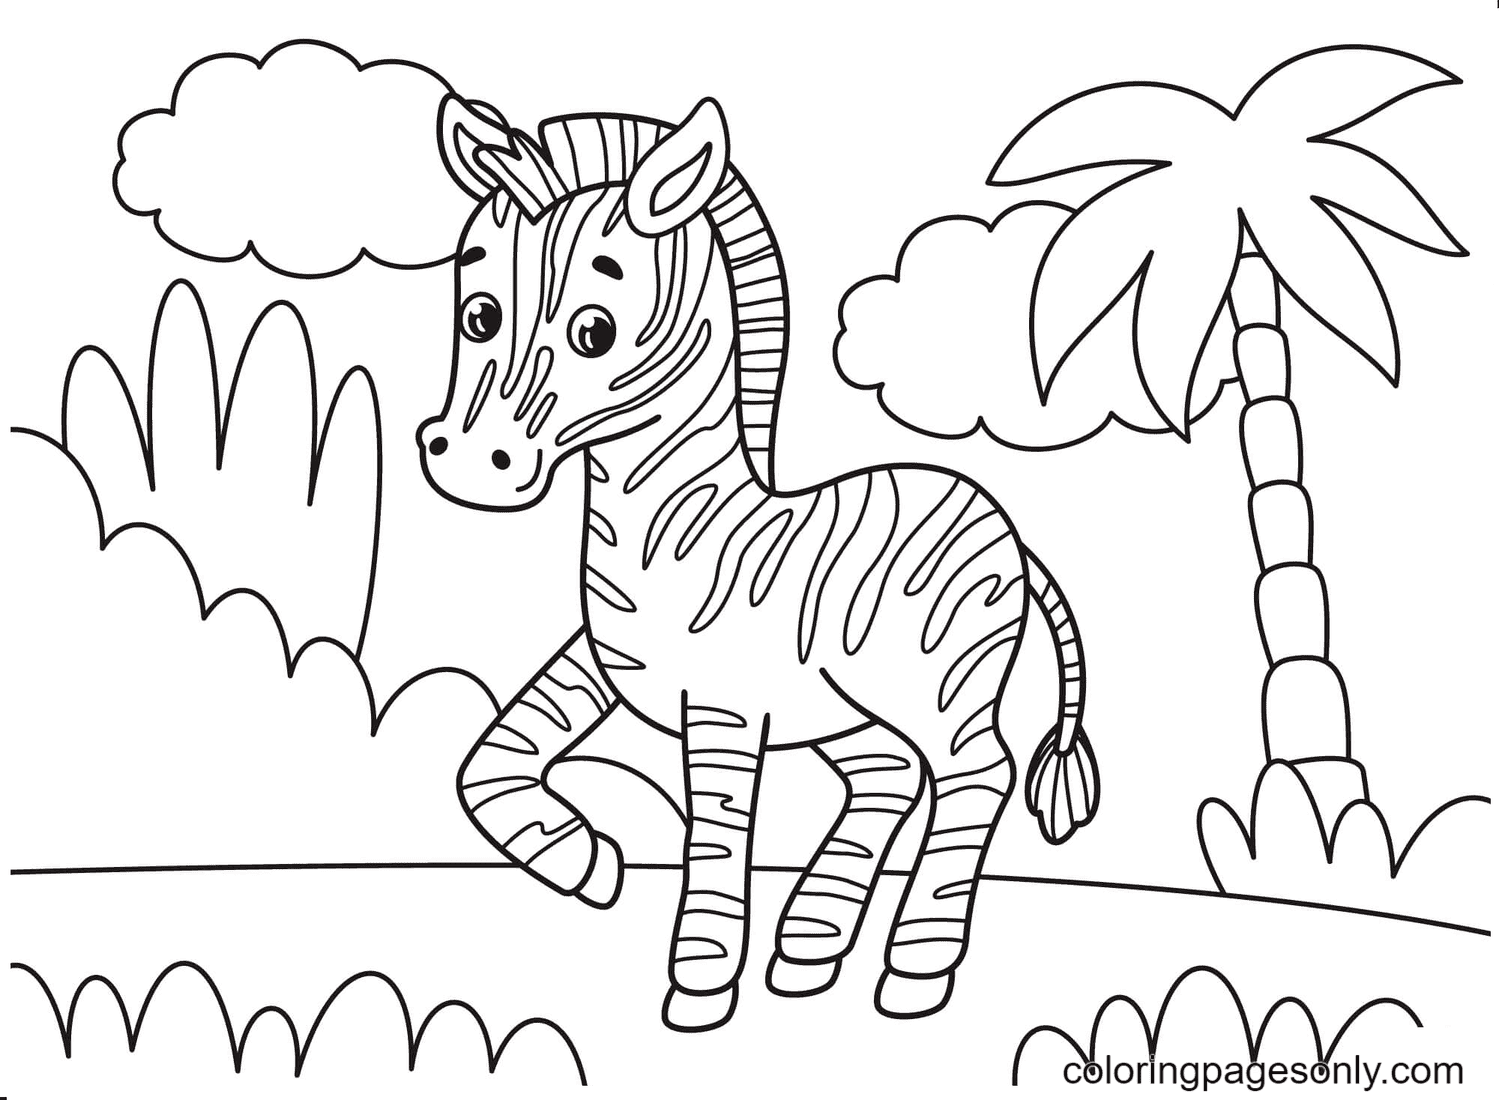 A Cute Zebra in The Forest Coloring Page